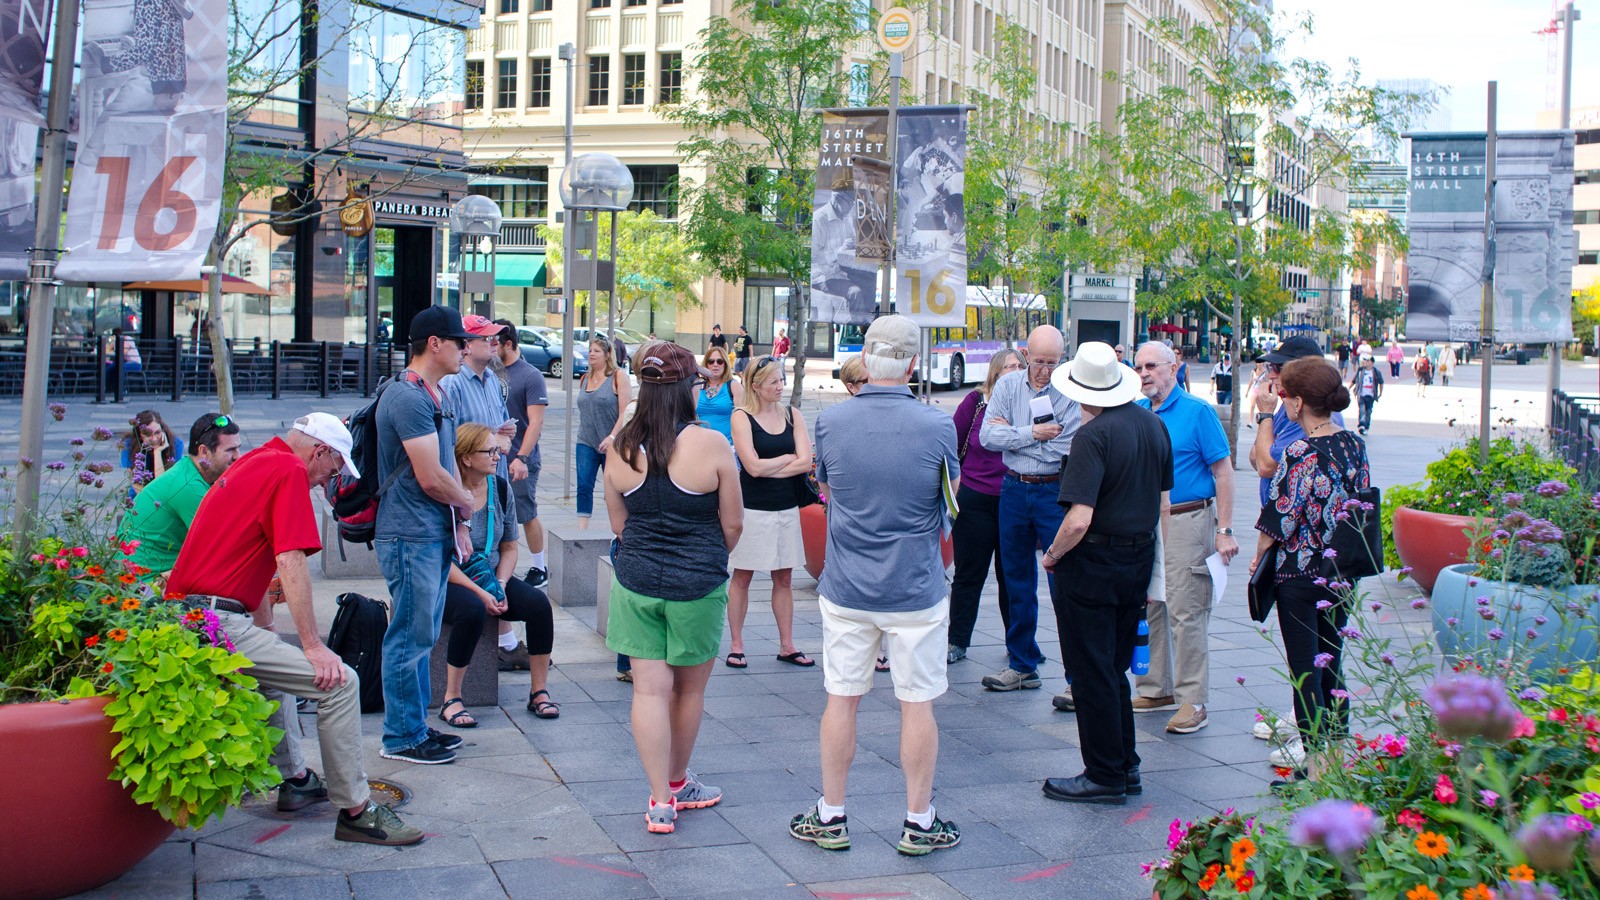 Tour attendees learn about the design of the 16th Street Mall